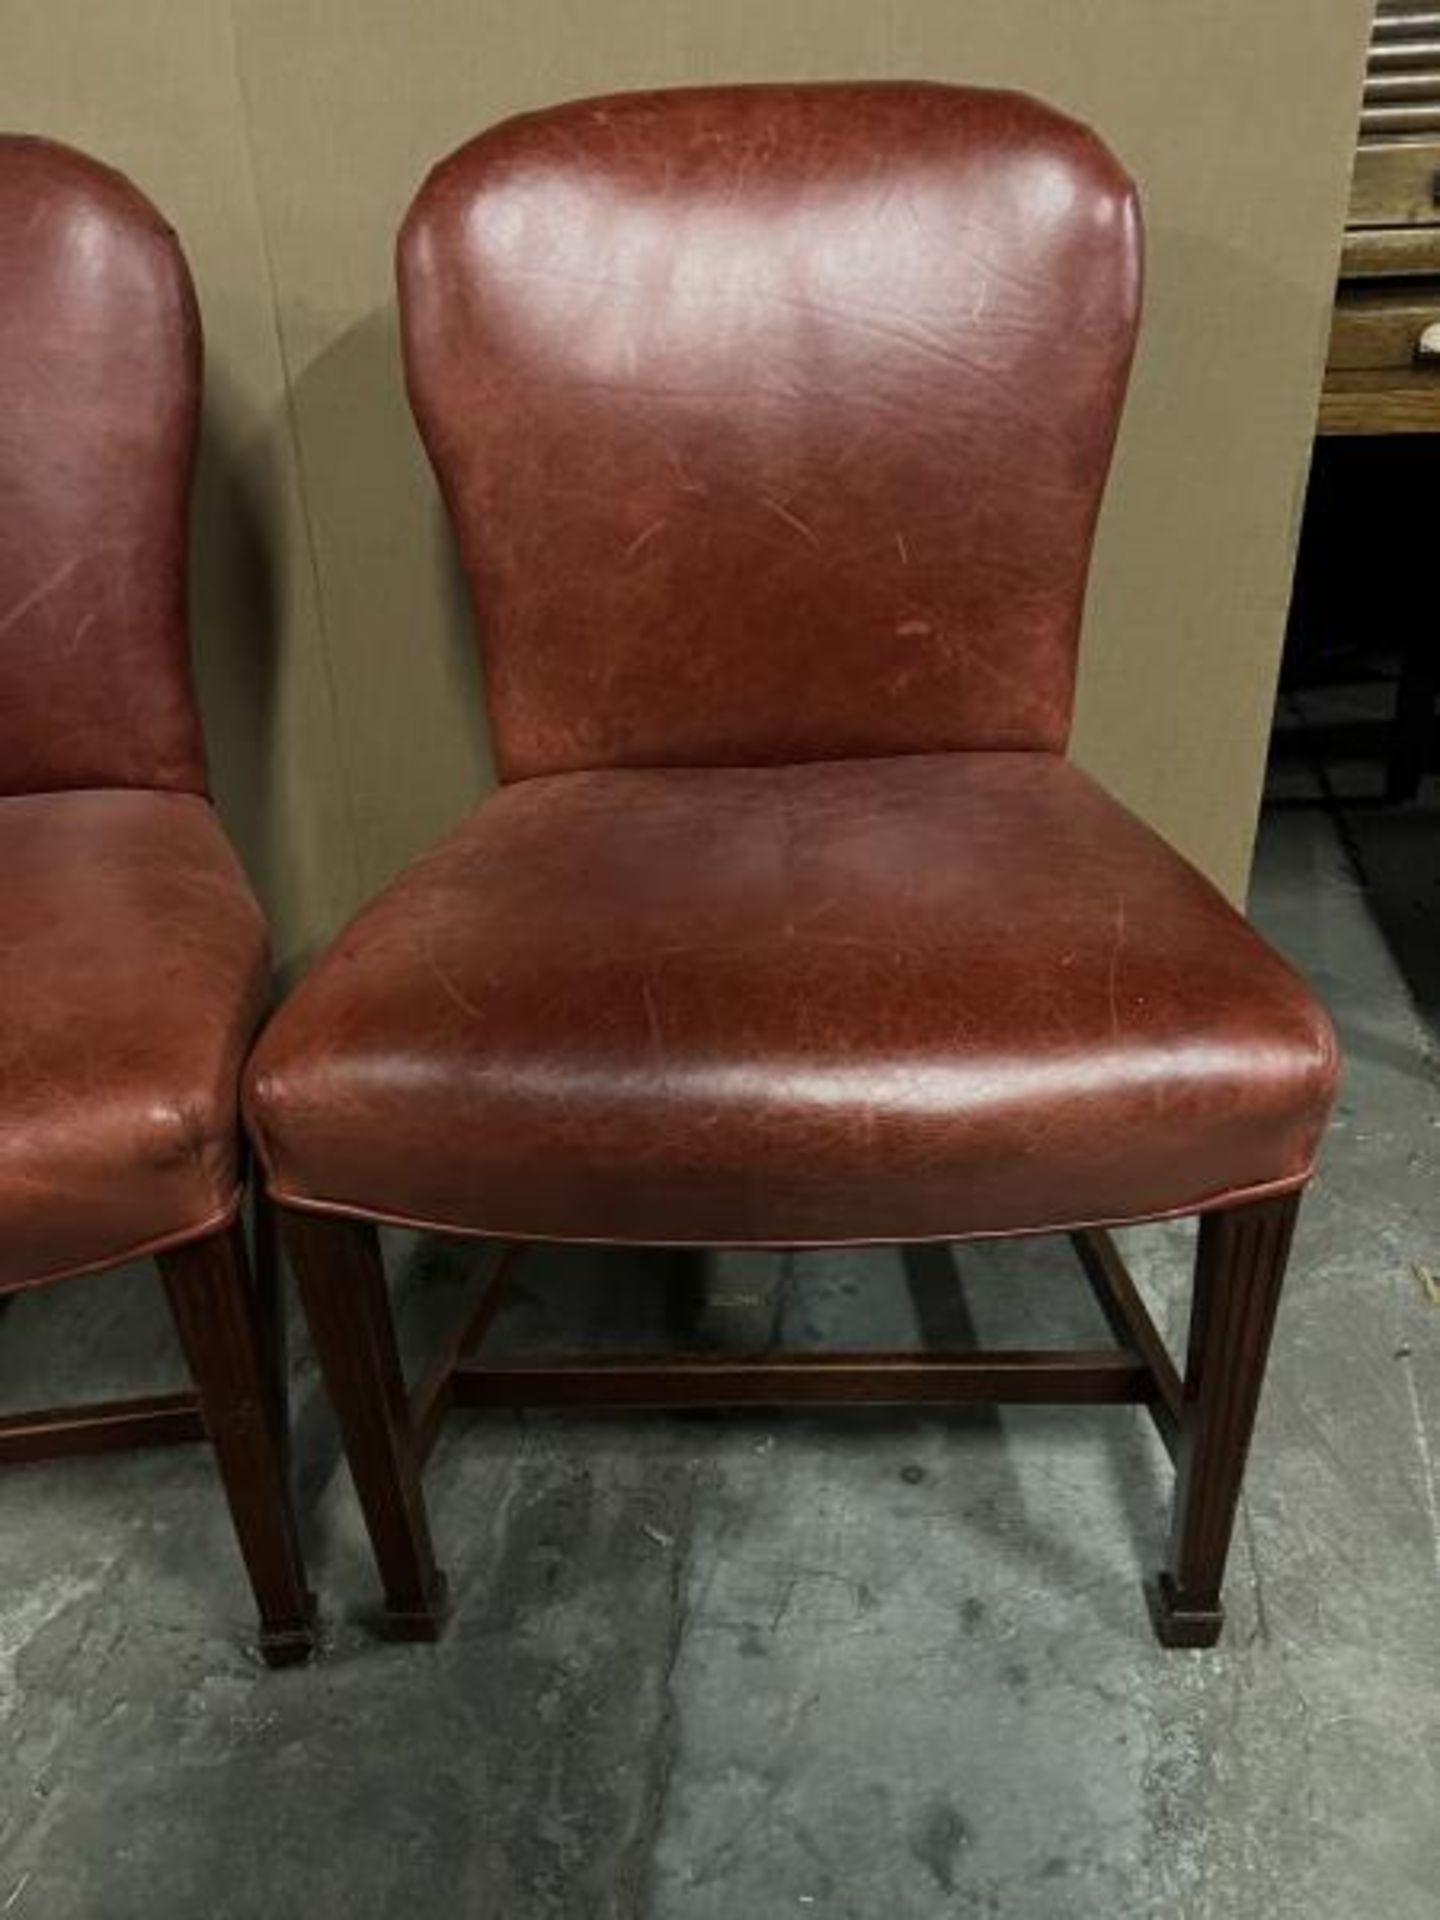 Pair of Red Vinyl Chairs; Located in Mill Building - Image 6 of 20